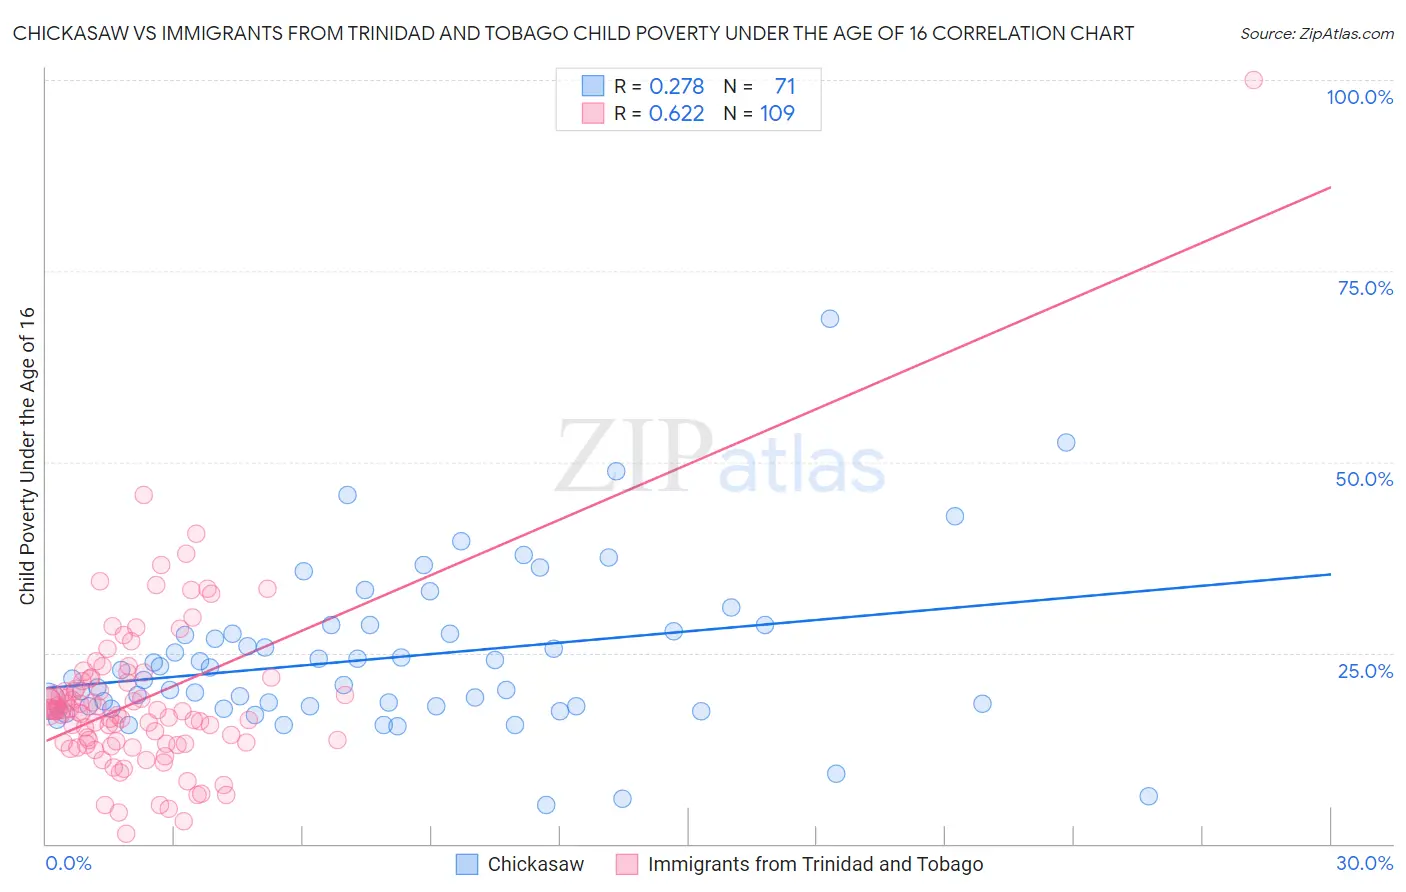 Chickasaw vs Immigrants from Trinidad and Tobago Child Poverty Under the Age of 16